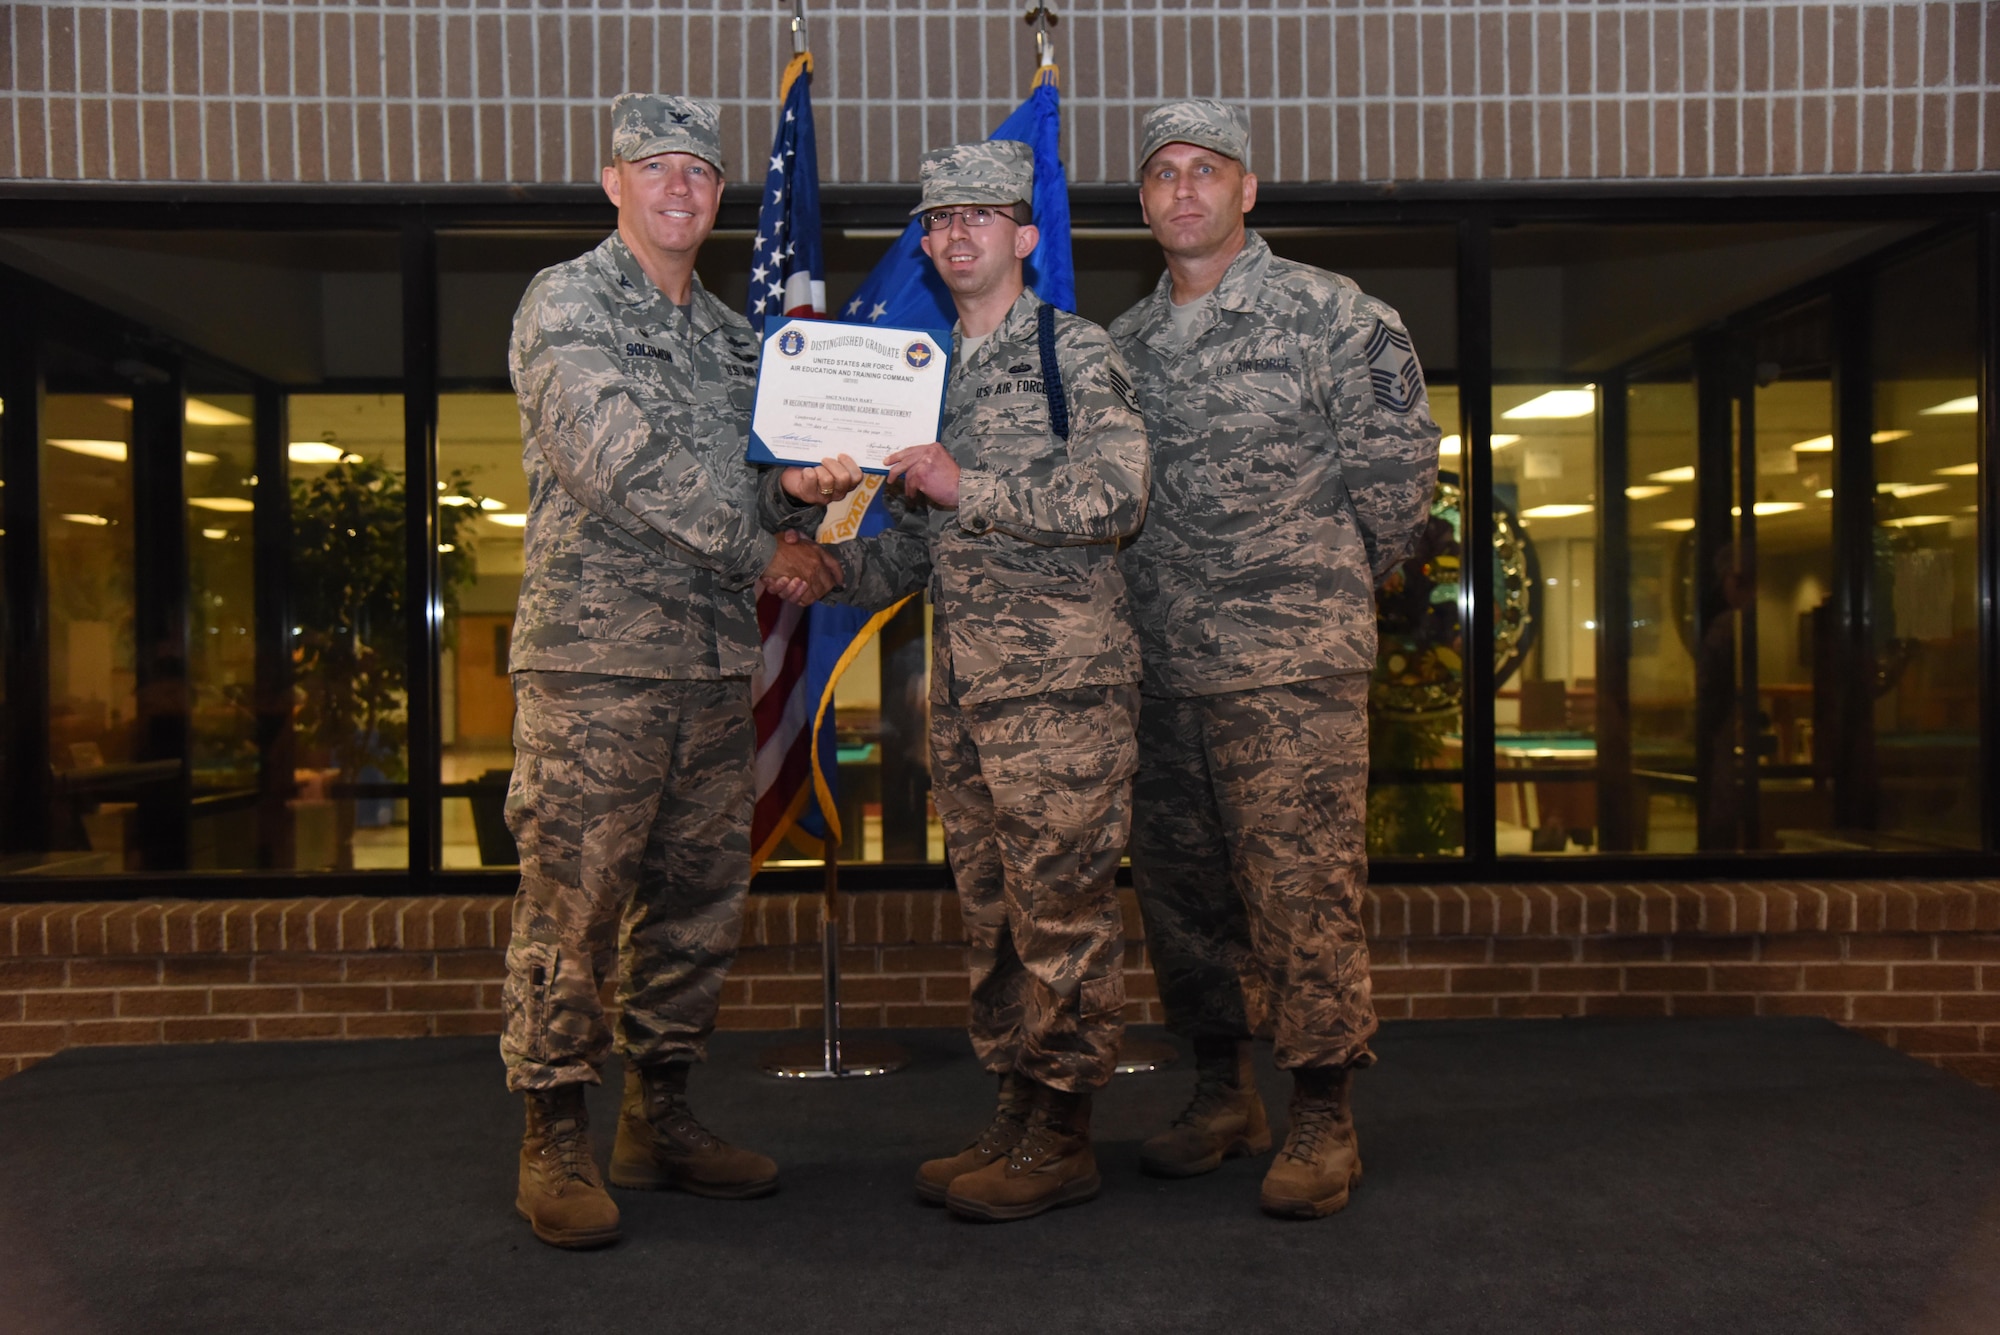 Staff Sgt. Nathan Hart, 334th Training Squadron military training leader, receives a distinguished graduate certificate from Col. Scott Solomon, 81st Training Group commander, and Chief Master Sgt. Anthony Fisher, 81st TRG chief, flag during a MTL graduation ceremony at Keesler Air Force Base, Miss., Nov. 18, 2016. The graduating students were the first class to attend the revised MTL course which includes Human Behavior and the Profession of Arms Center of Excellence training. (U.S. Air Force photo by Kemberly Groue)